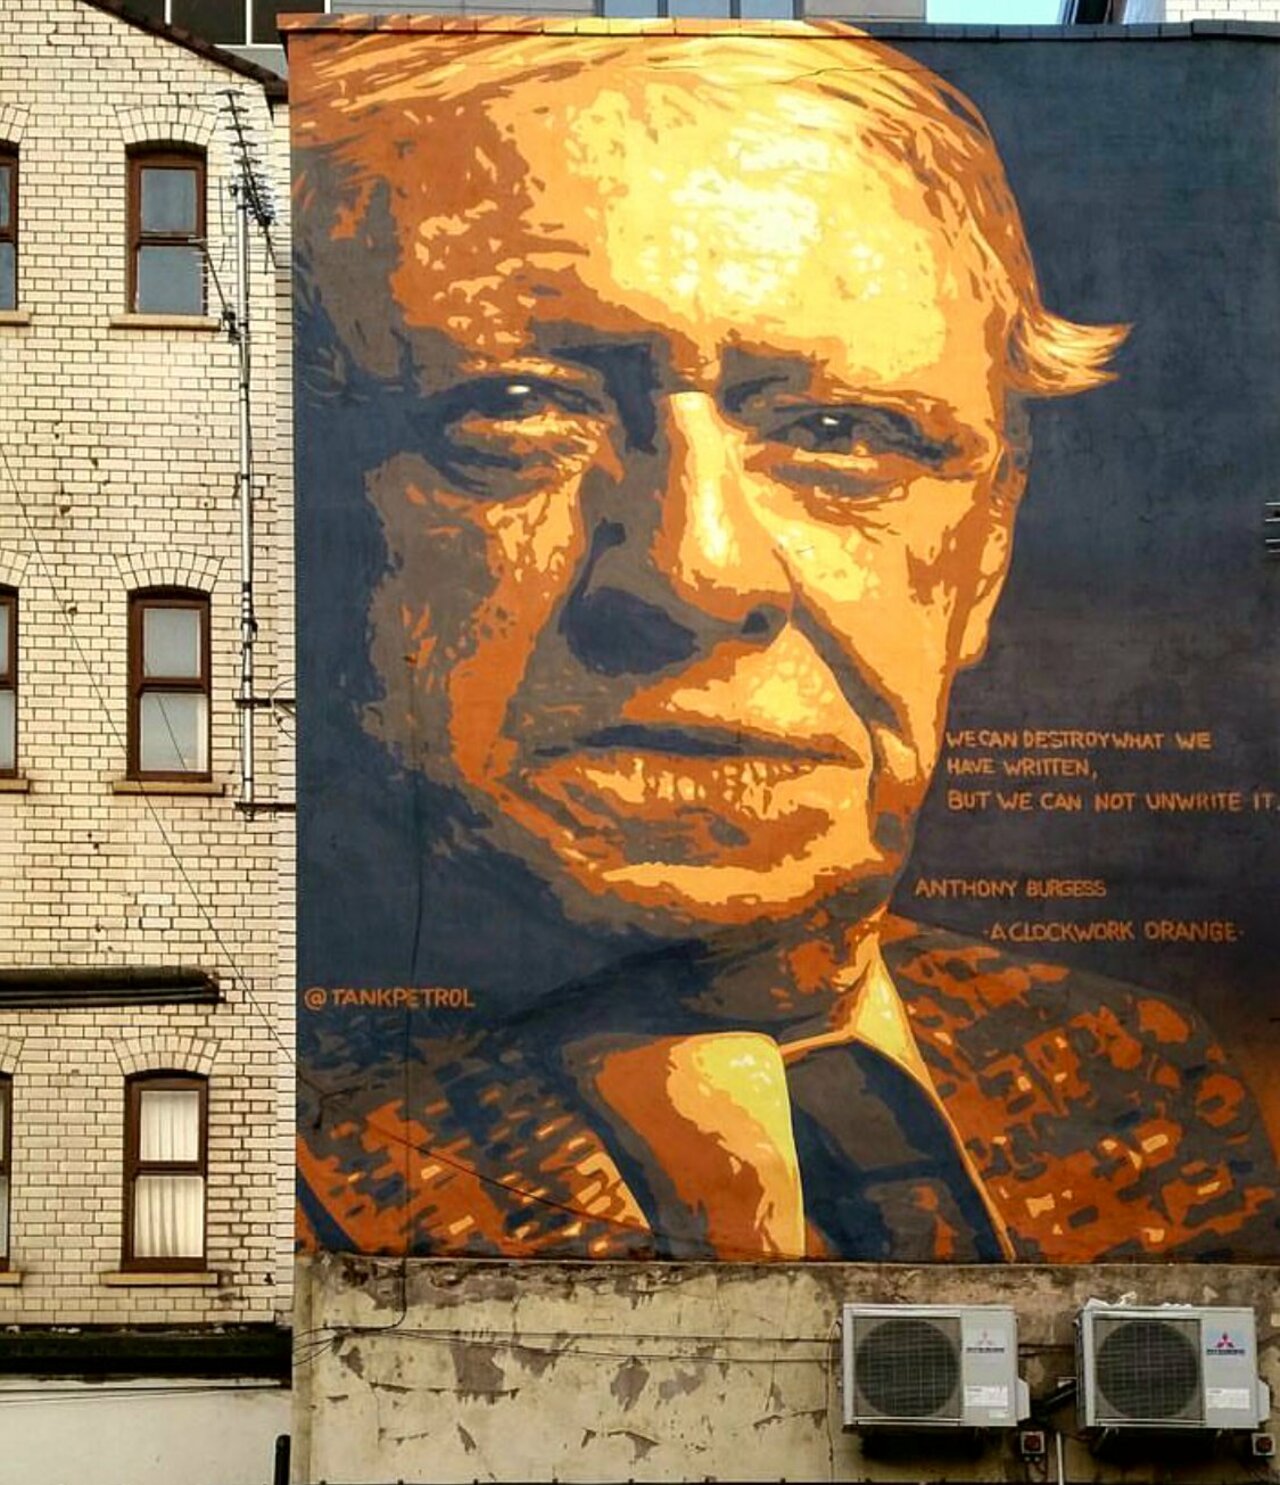 Stunning portrait of Anthony Burgess by @_tankpetrol in #manchester #uk #citiesofhope #streetart #contemporaryart https://t.co/ypI2uyxymU